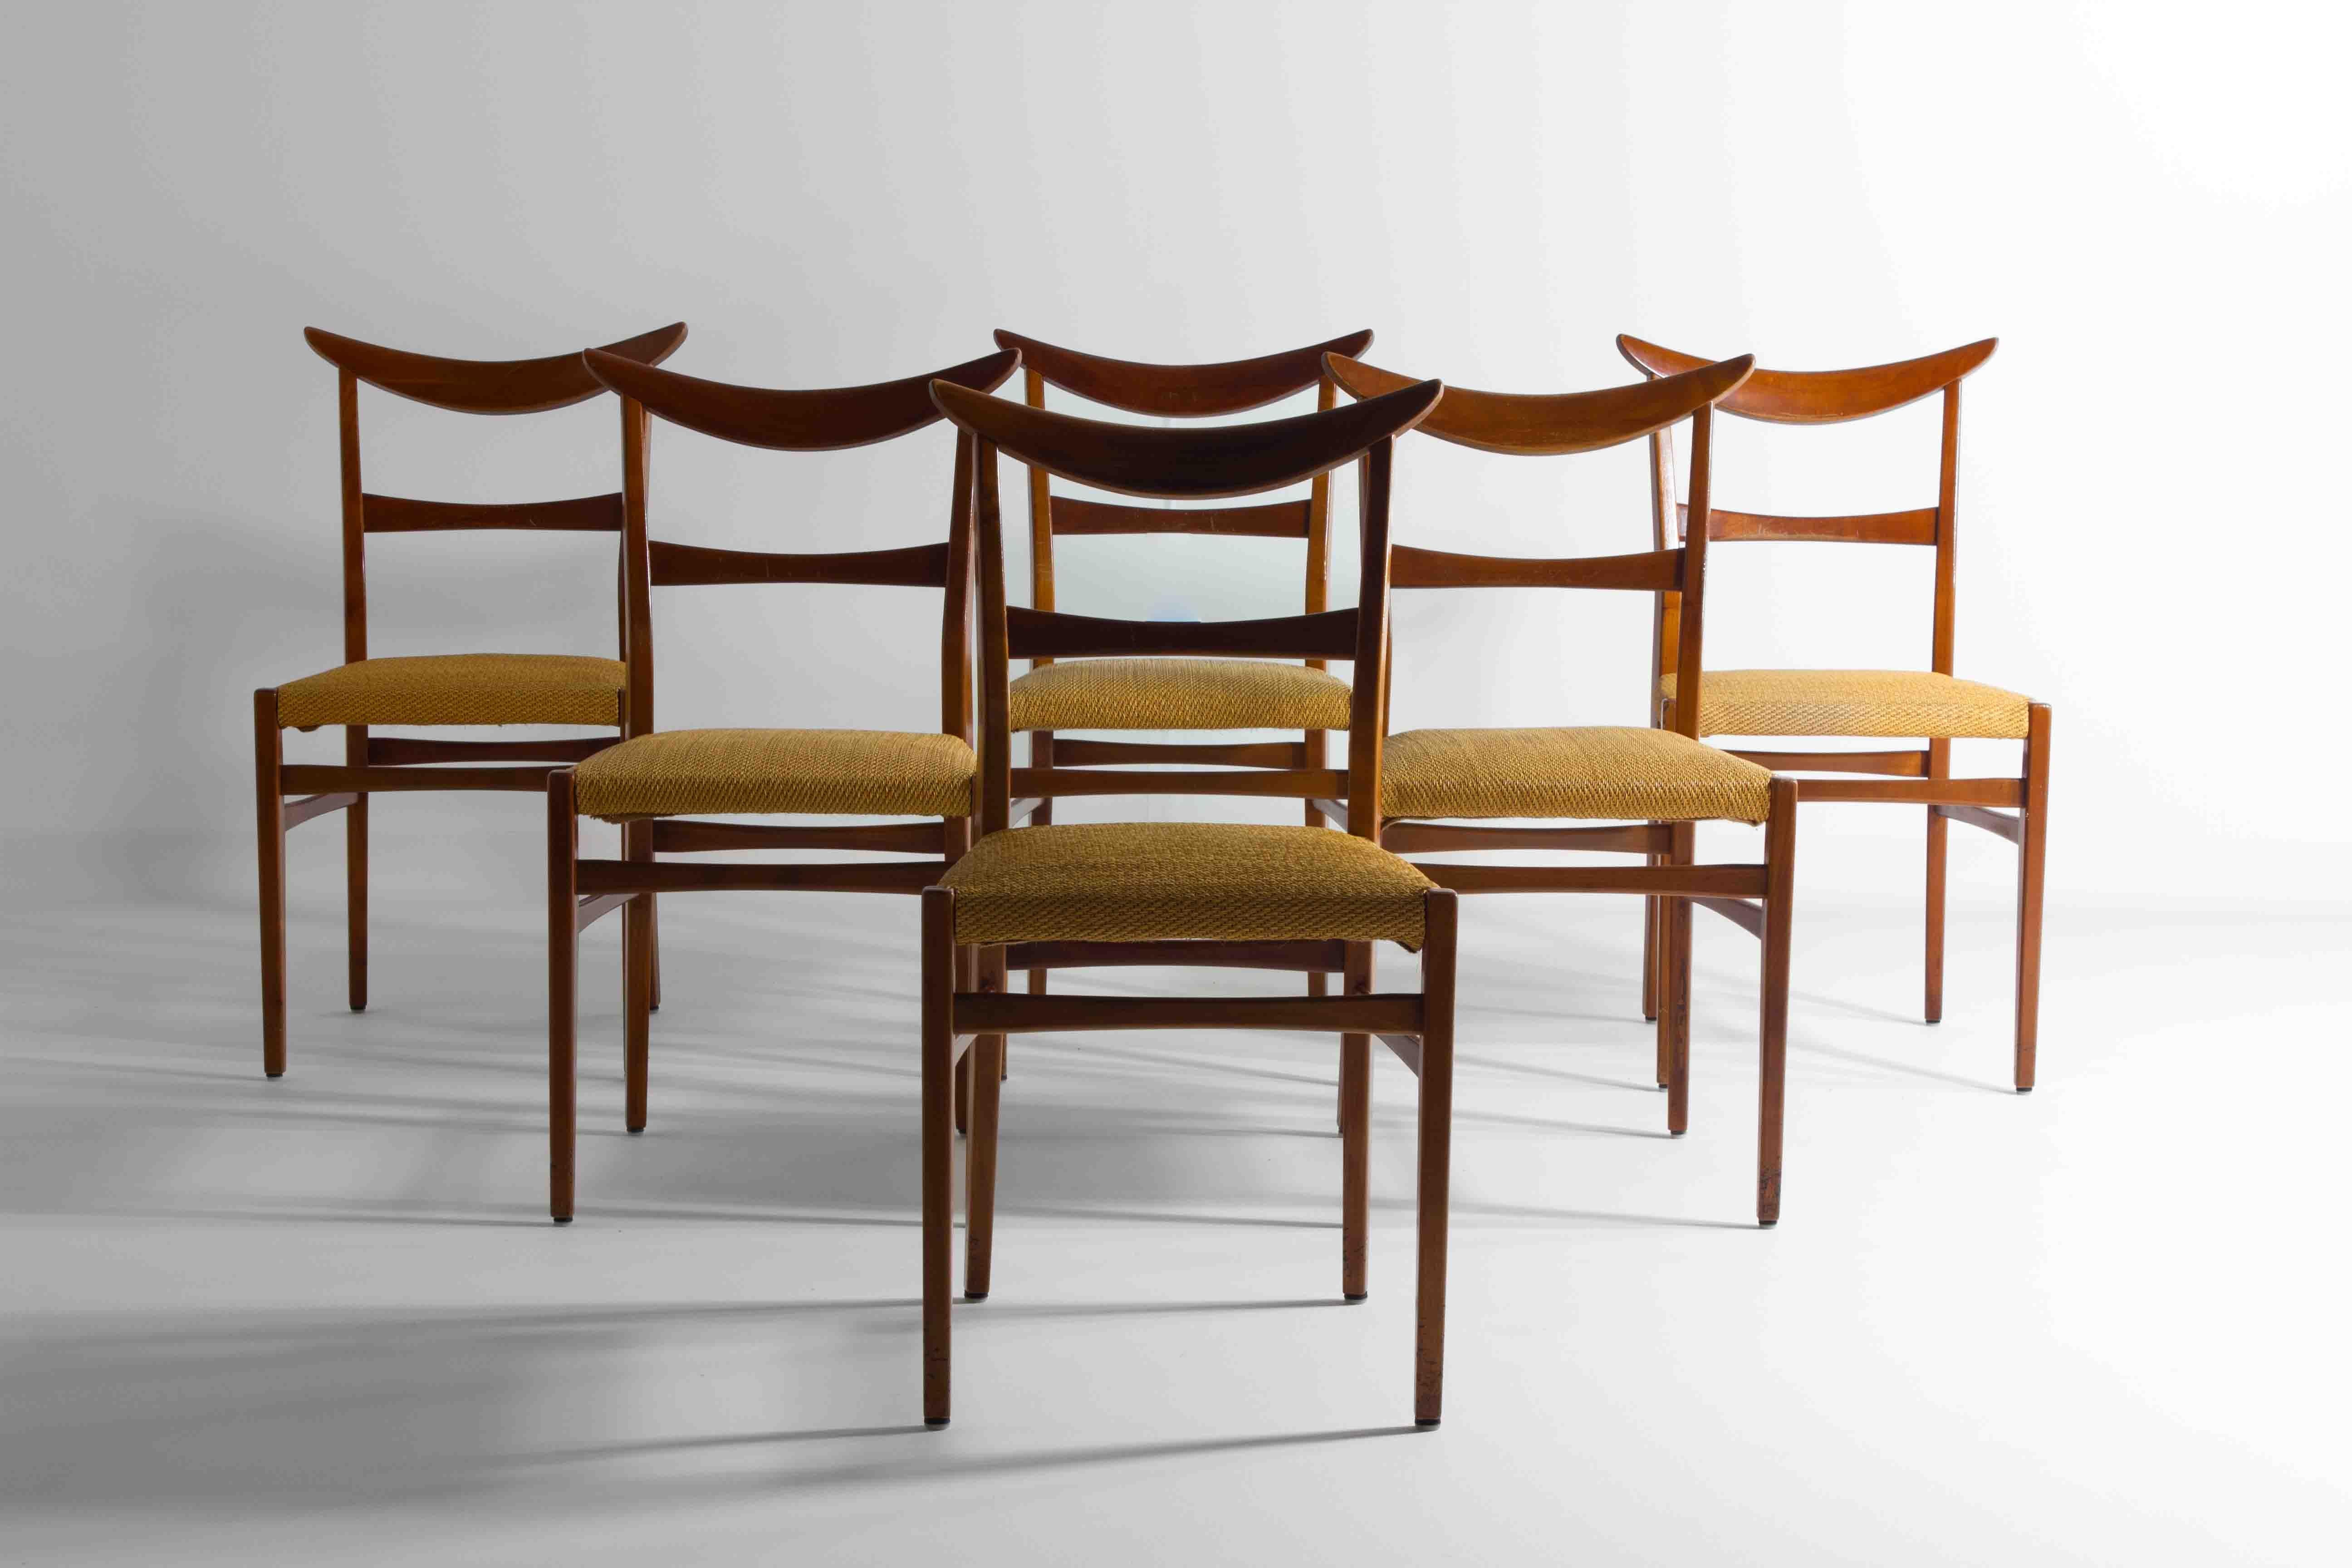 This mid-century set of six dining chairs exemplifies timeless design with its teak wood construction and unique arched backs. Each chair boasts a rich, warm hue that highlights the natural grain of the wood, ensuring that they bring a touch of